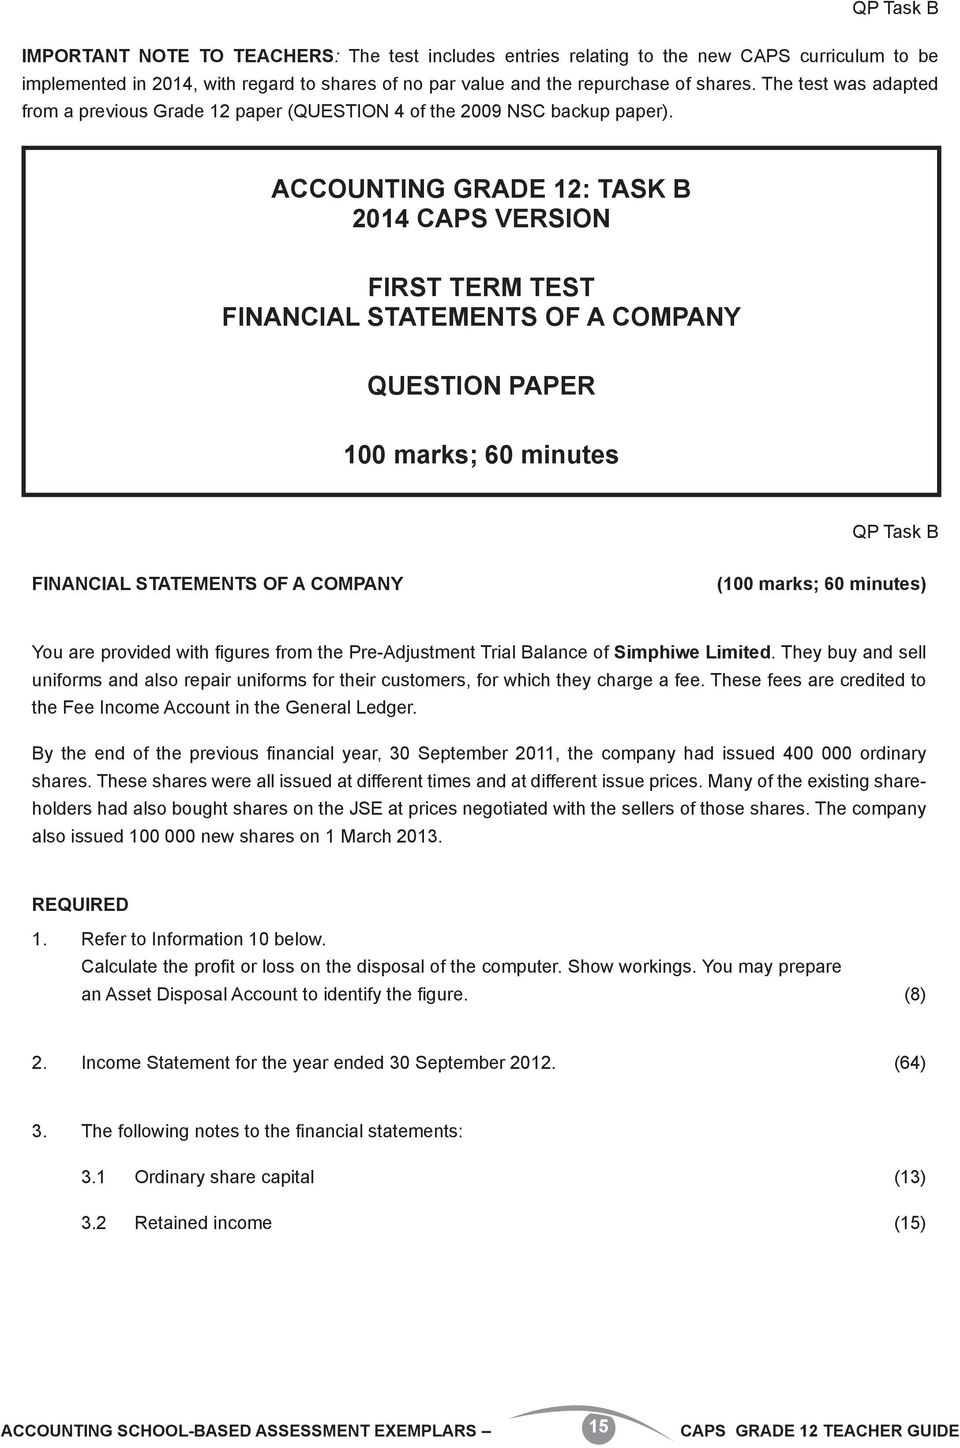 ACCOUNTING GRADE 12: TASK B 2014 CAPS VERSION FIRST TERM TEST FINANCIAL STATEMENTS OF A COMPANY QUESTION PAPER 100 marks; 60 minutes QP Task B FINANCIAL STATEMENTS OF A COMPANY (100 marks; 60